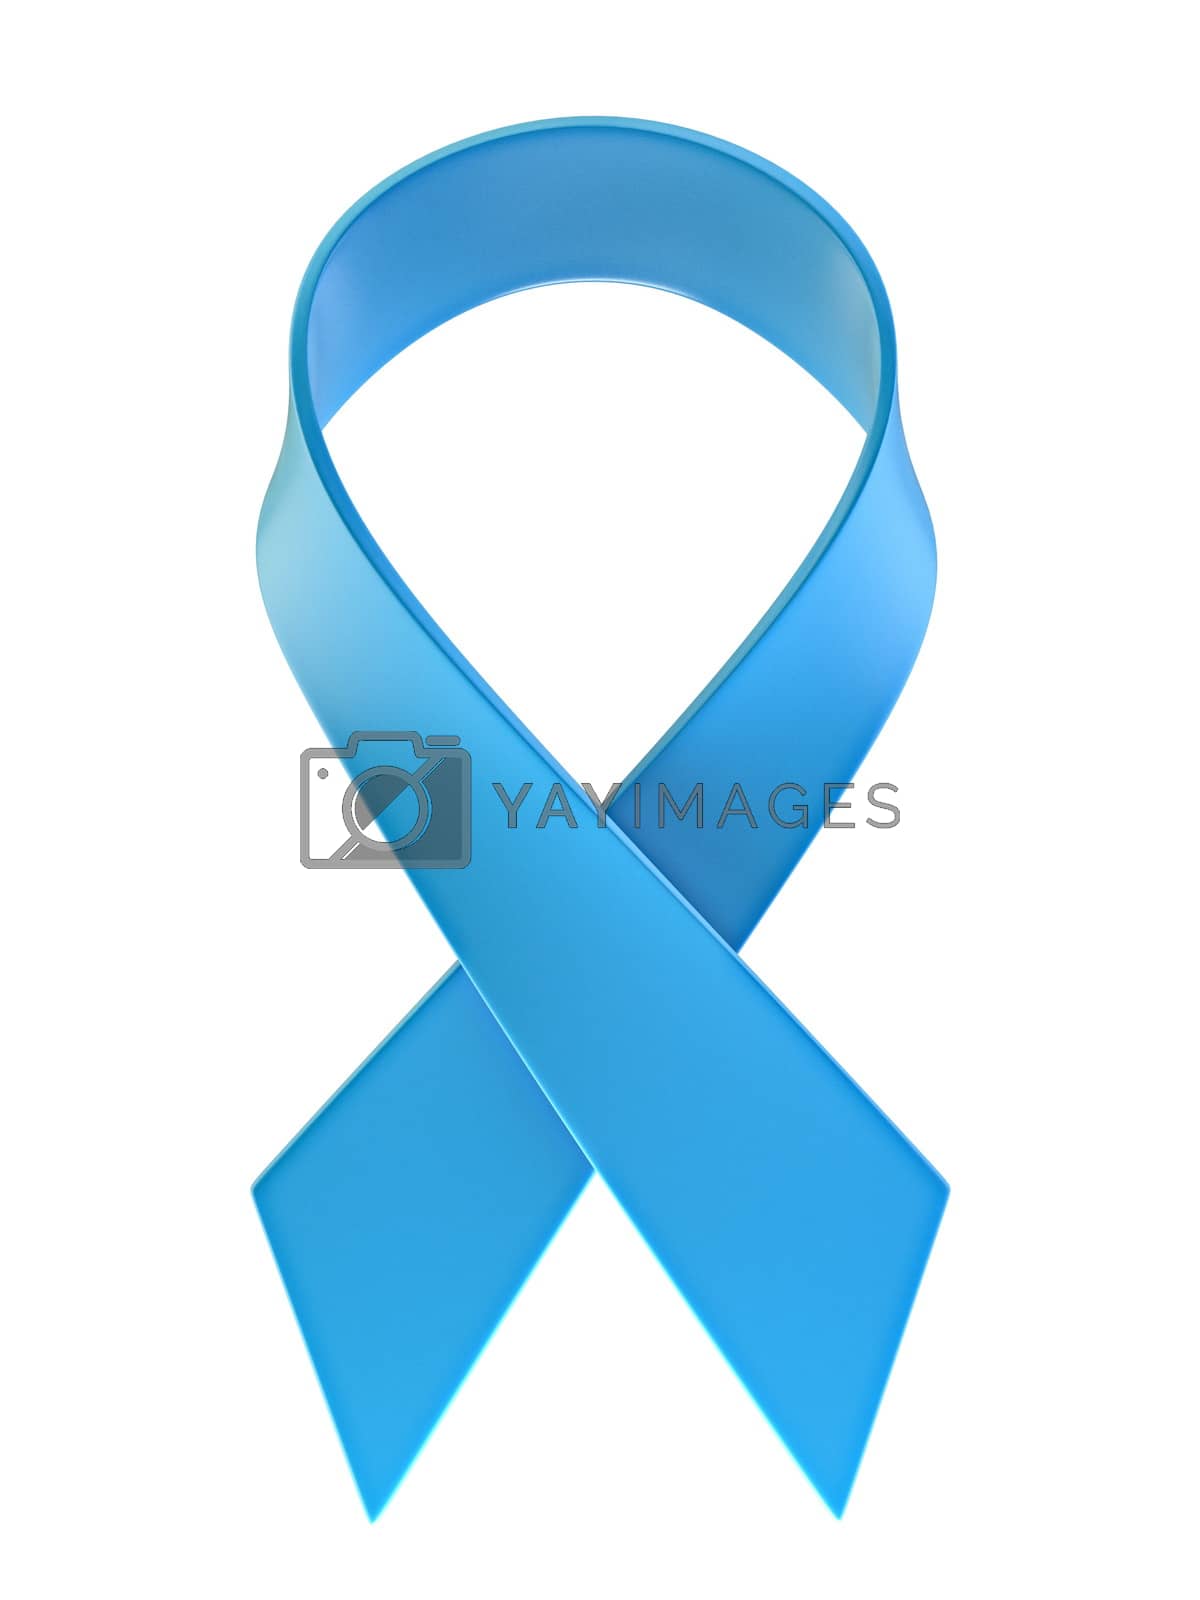 Royalty free image of Blue cancer awareness ribbon 3D by djmilic